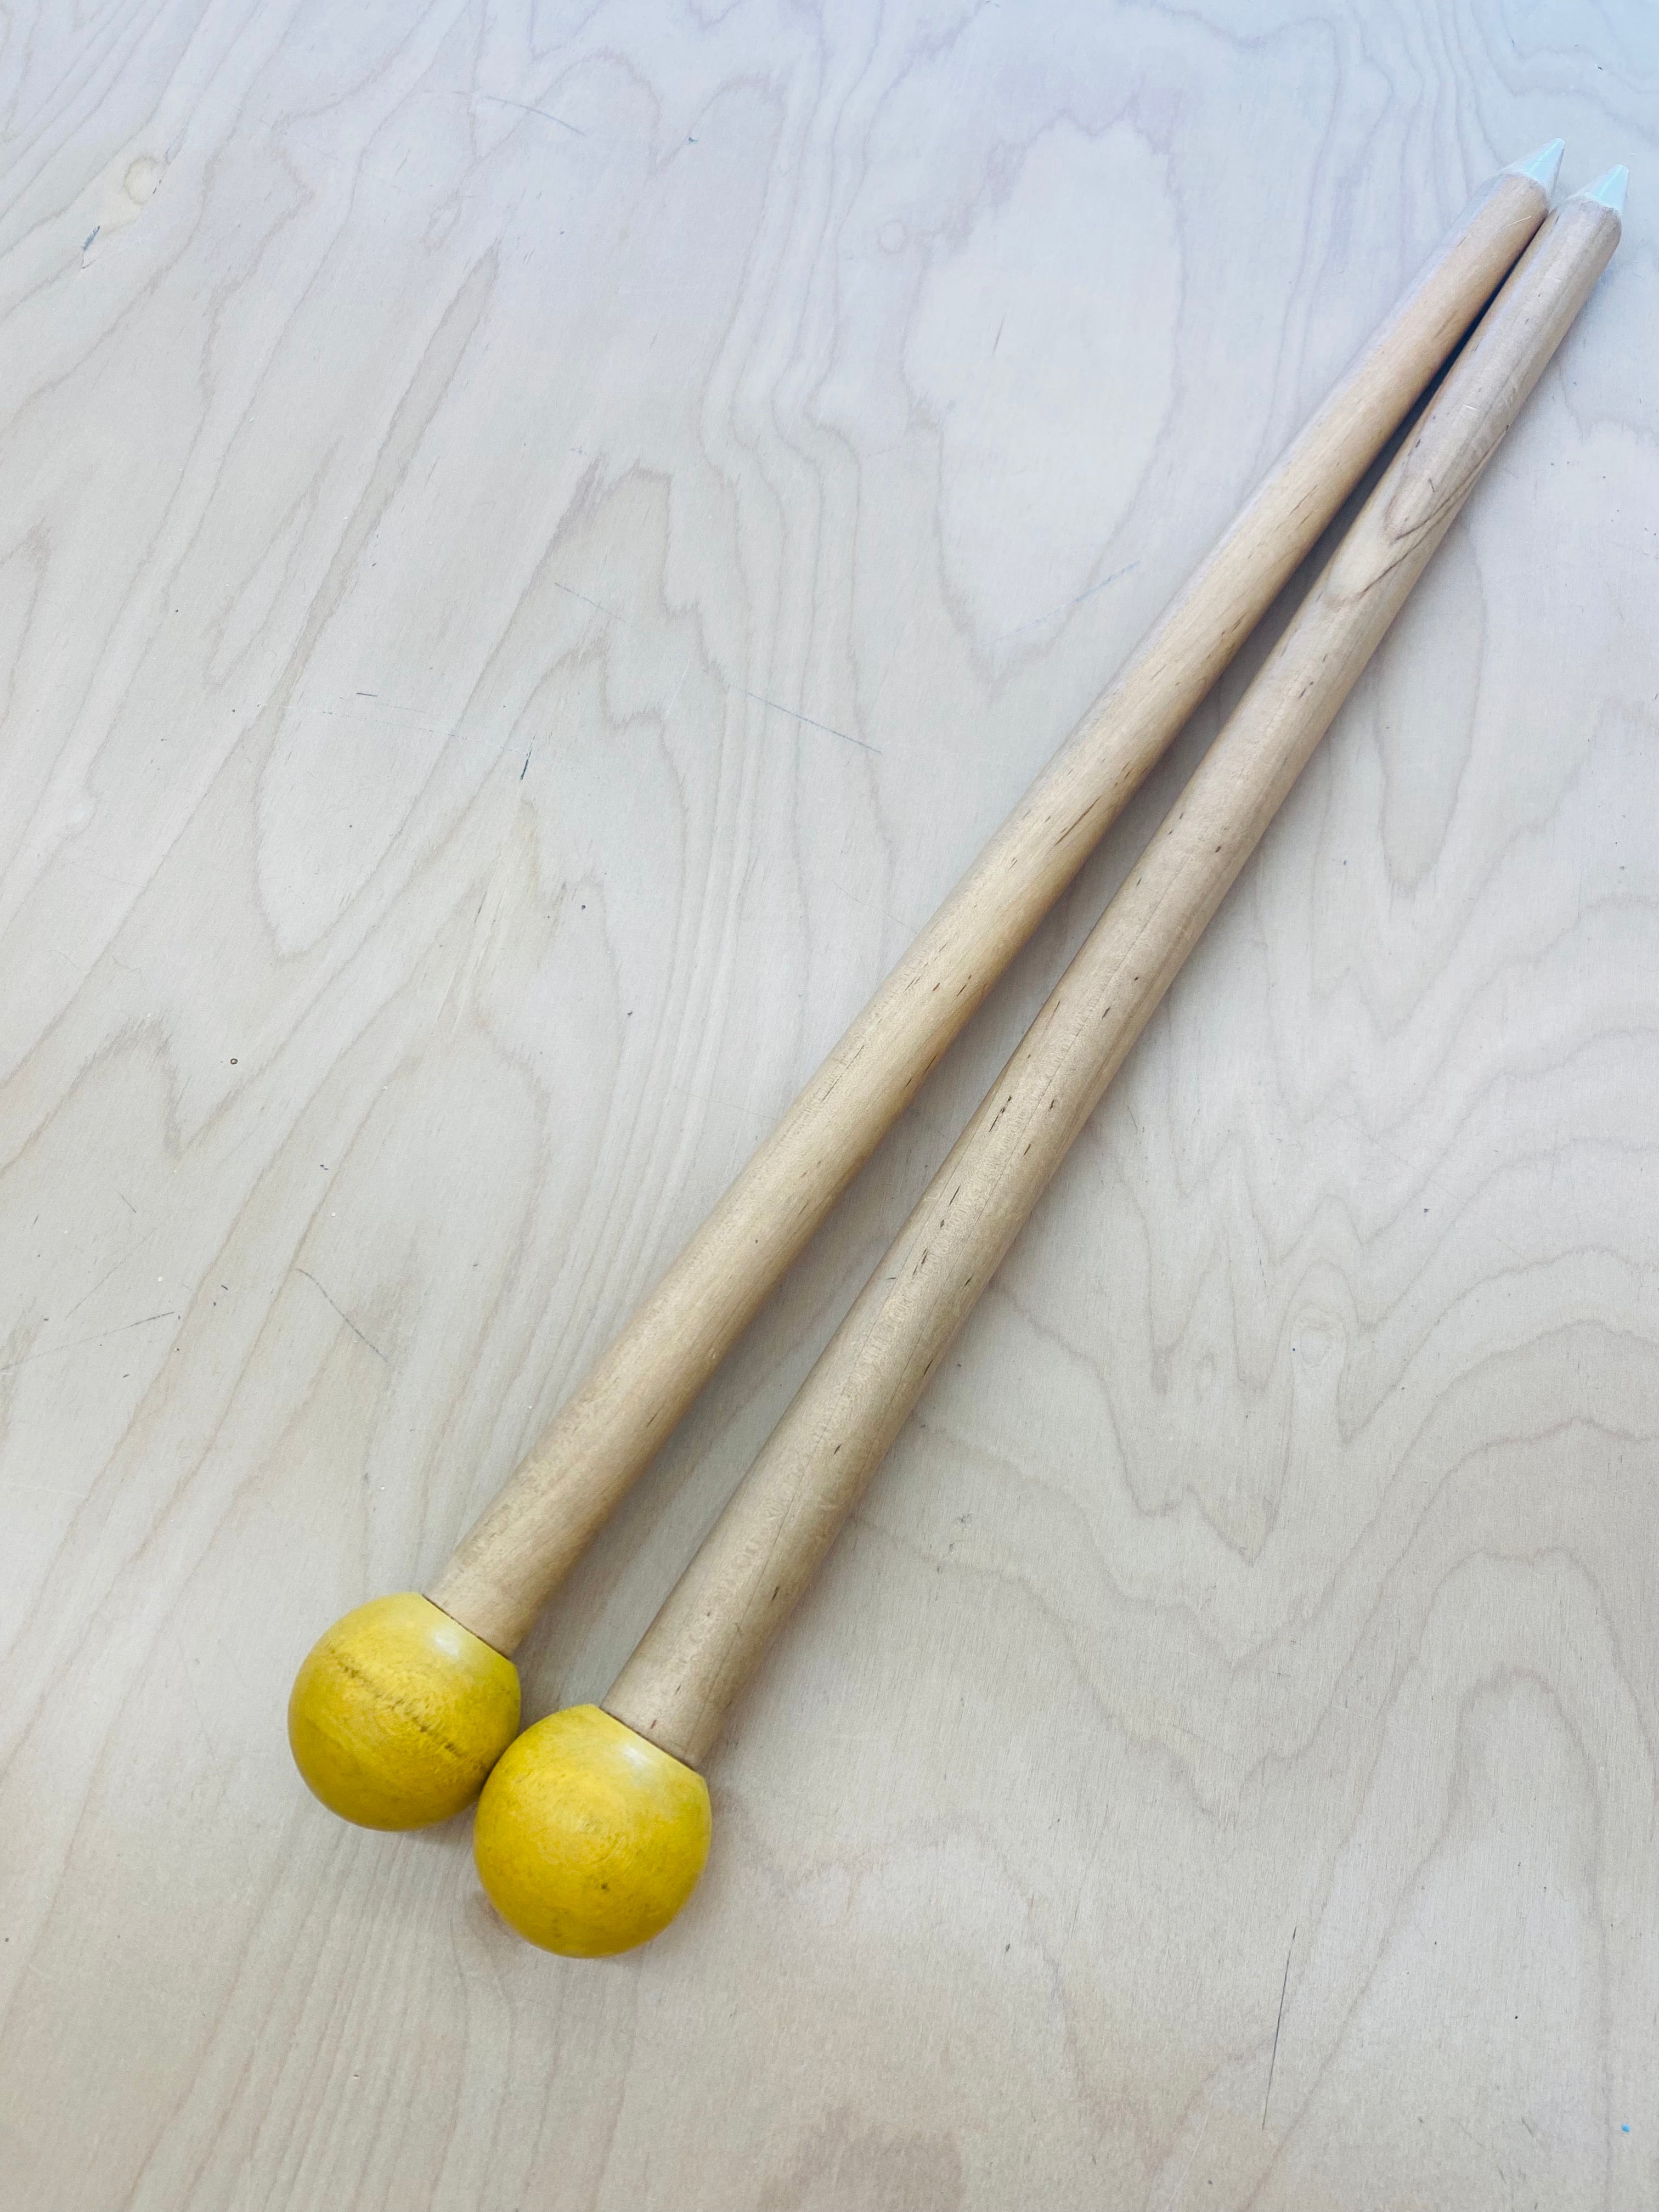 Giant Wooden Knitting Needles (one pair)